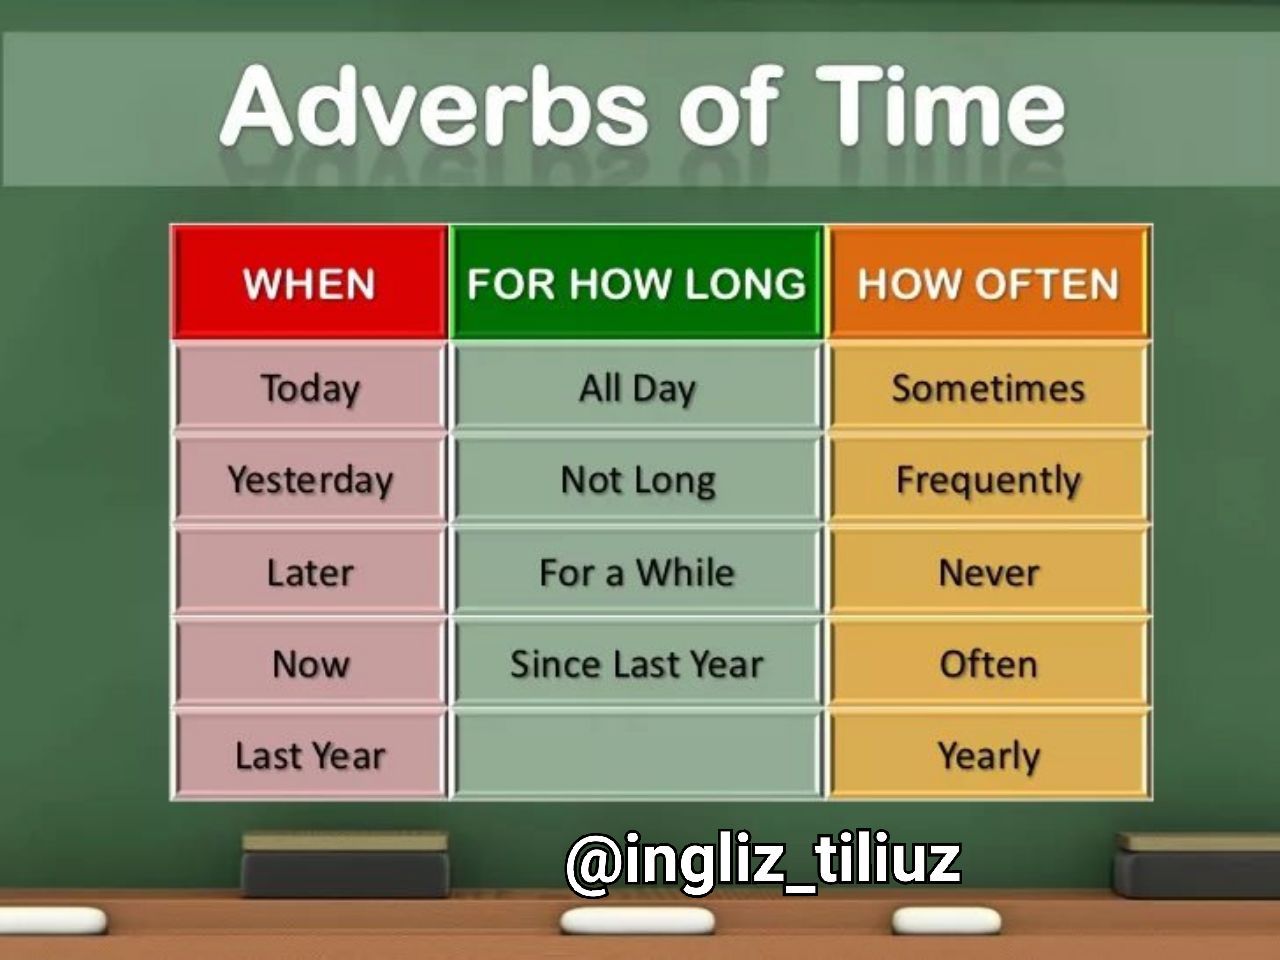 Last adverb. Adverbs of time. Adverbial of time. Adverbs of Focus. Adverbs of time and place таблица.